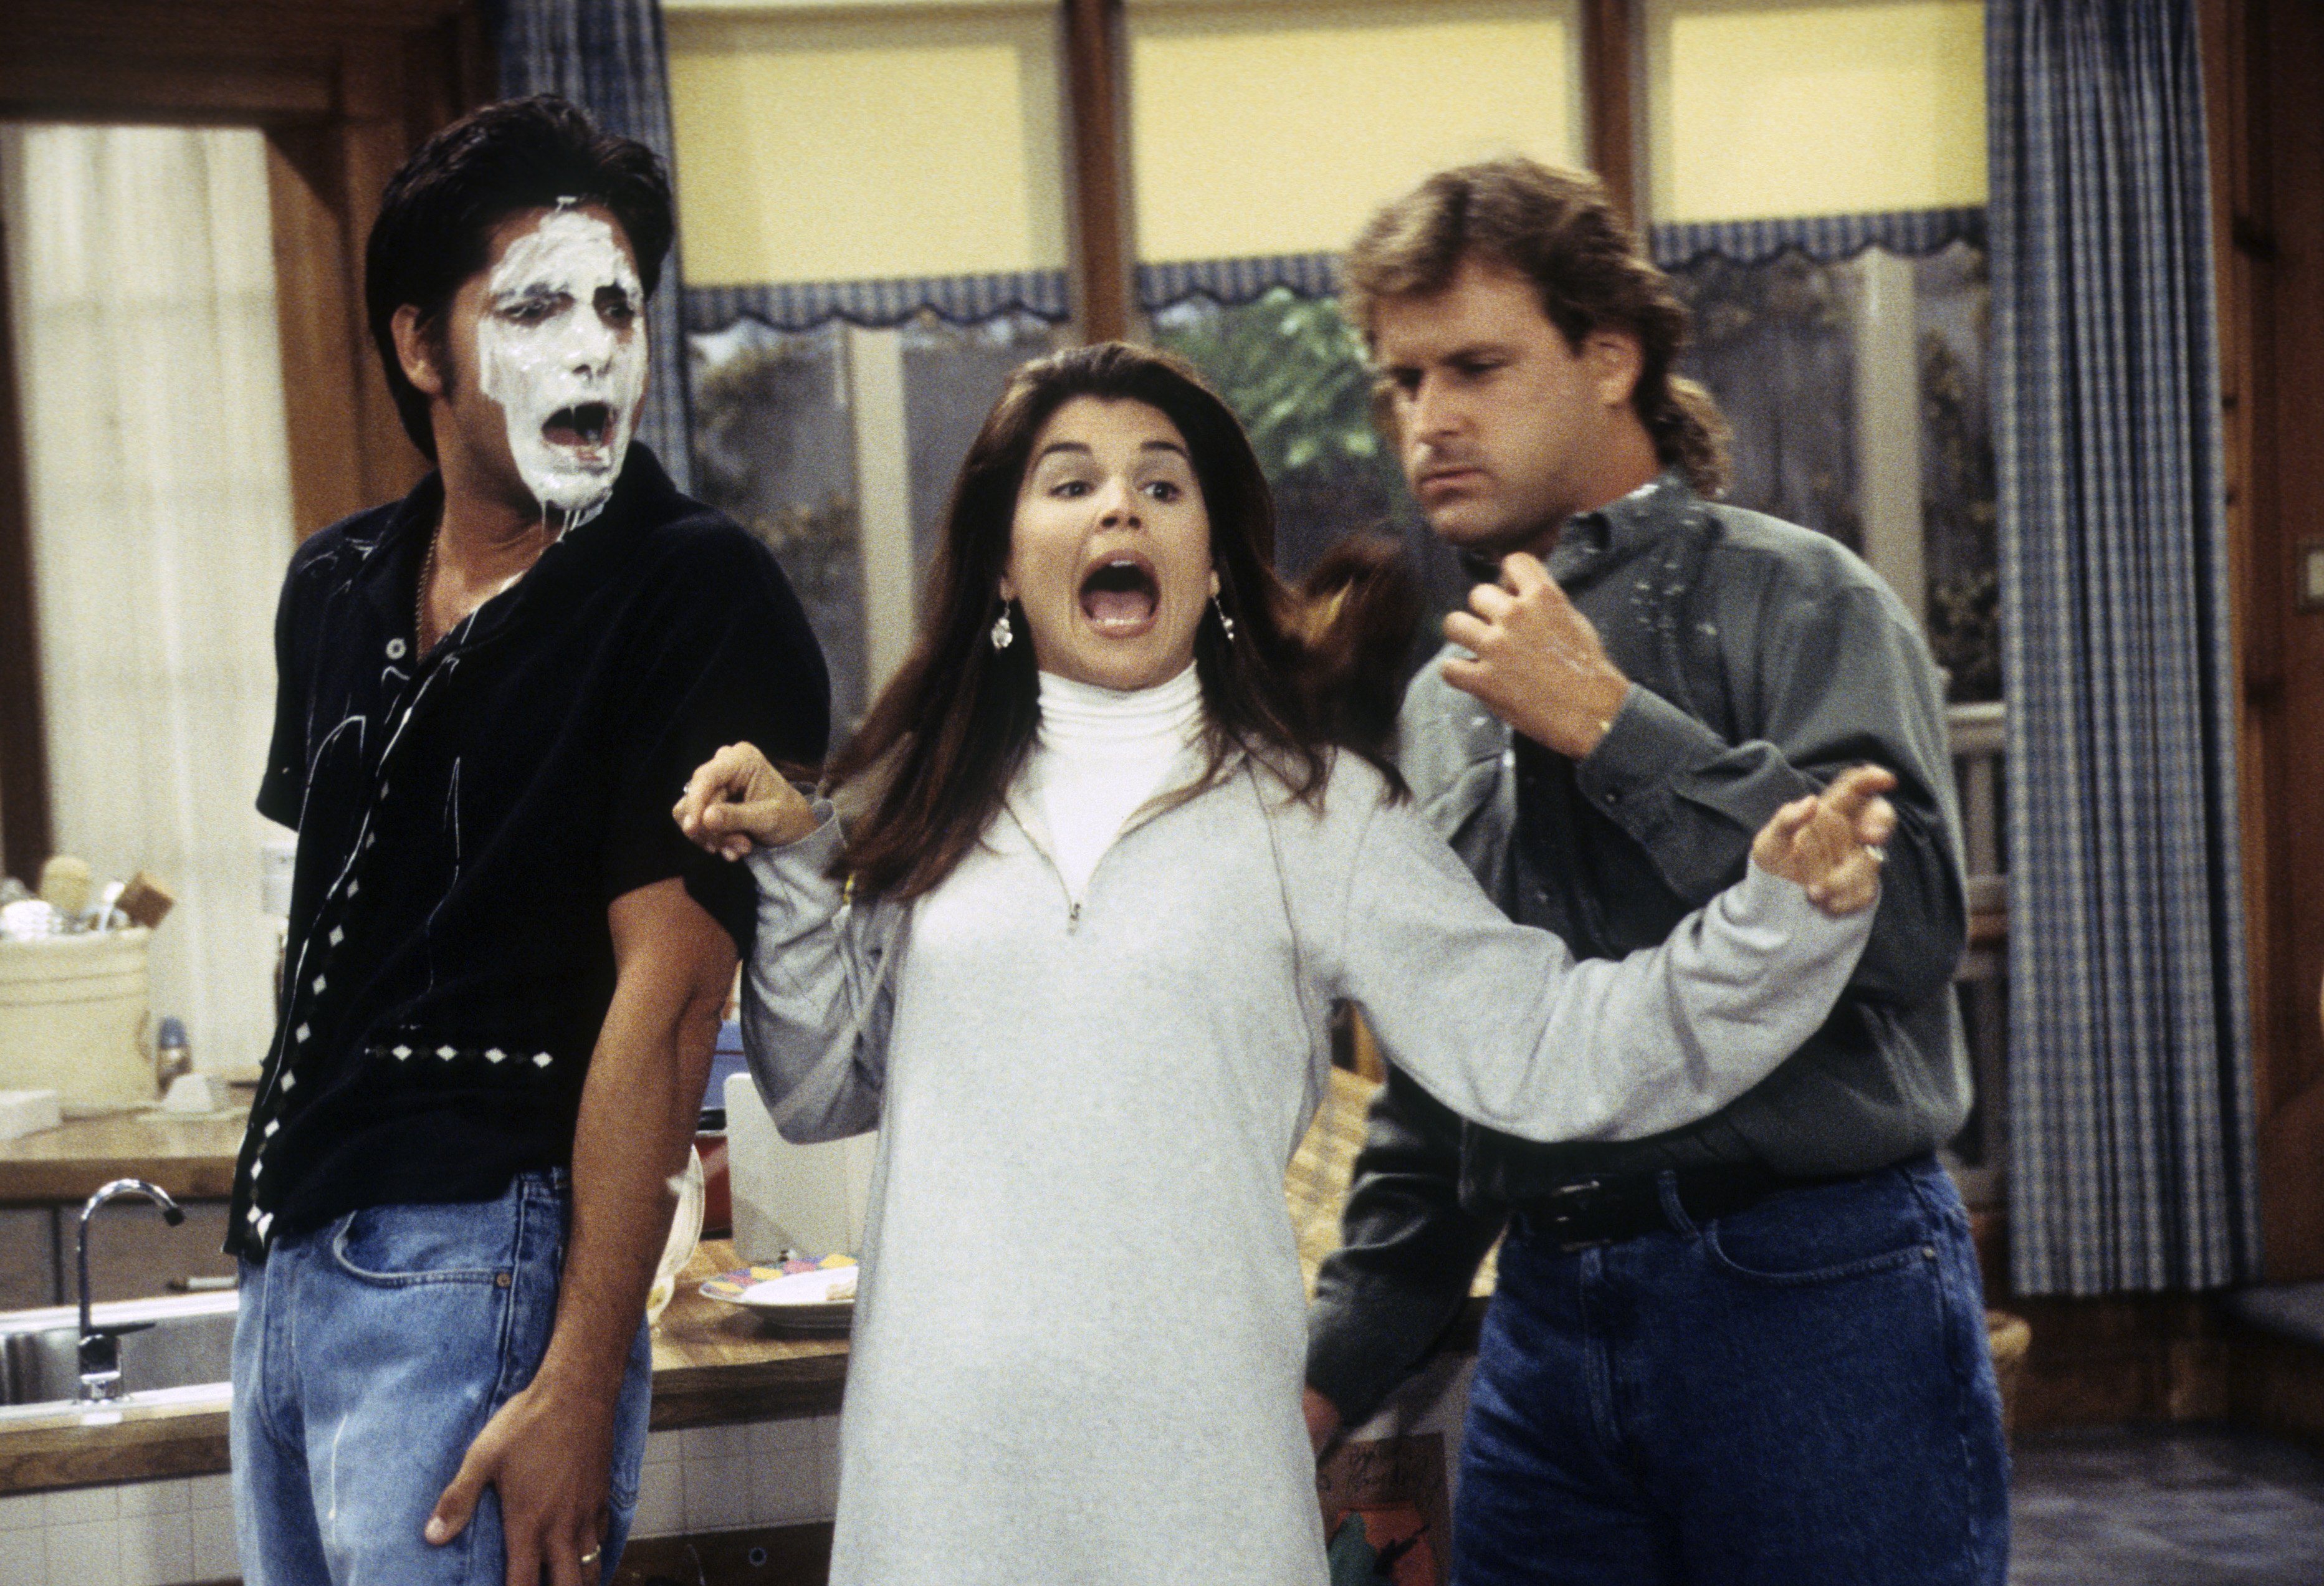 'Full House' Episode Titled 'Under The Influence'